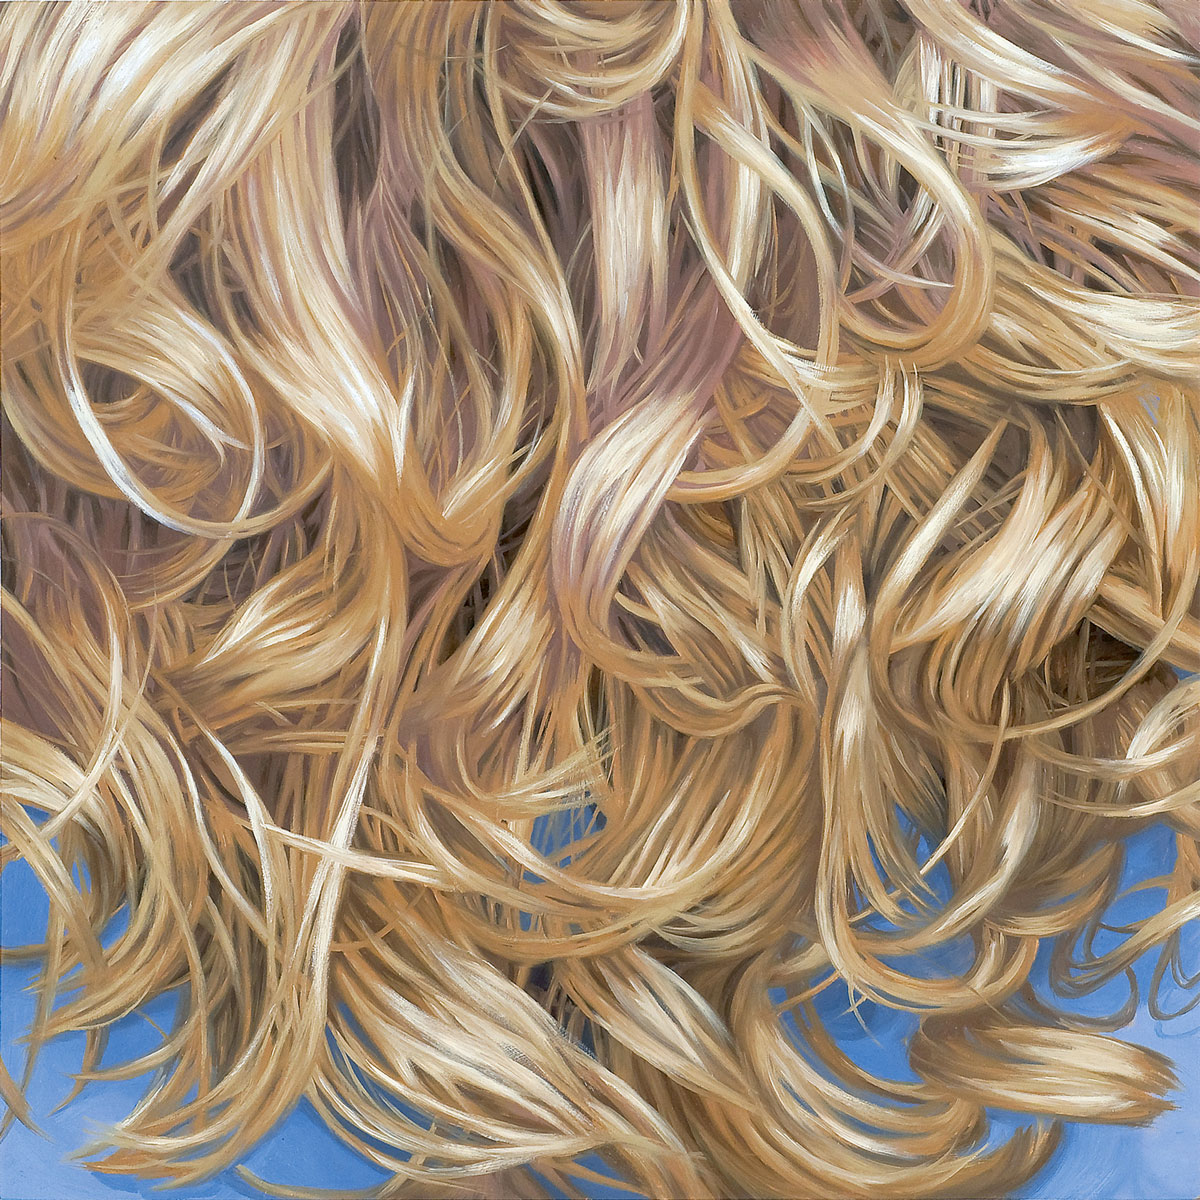 Artist Julia Jacquette’s two thousand and eight painting of hair titled “Blond, Curls 2.”